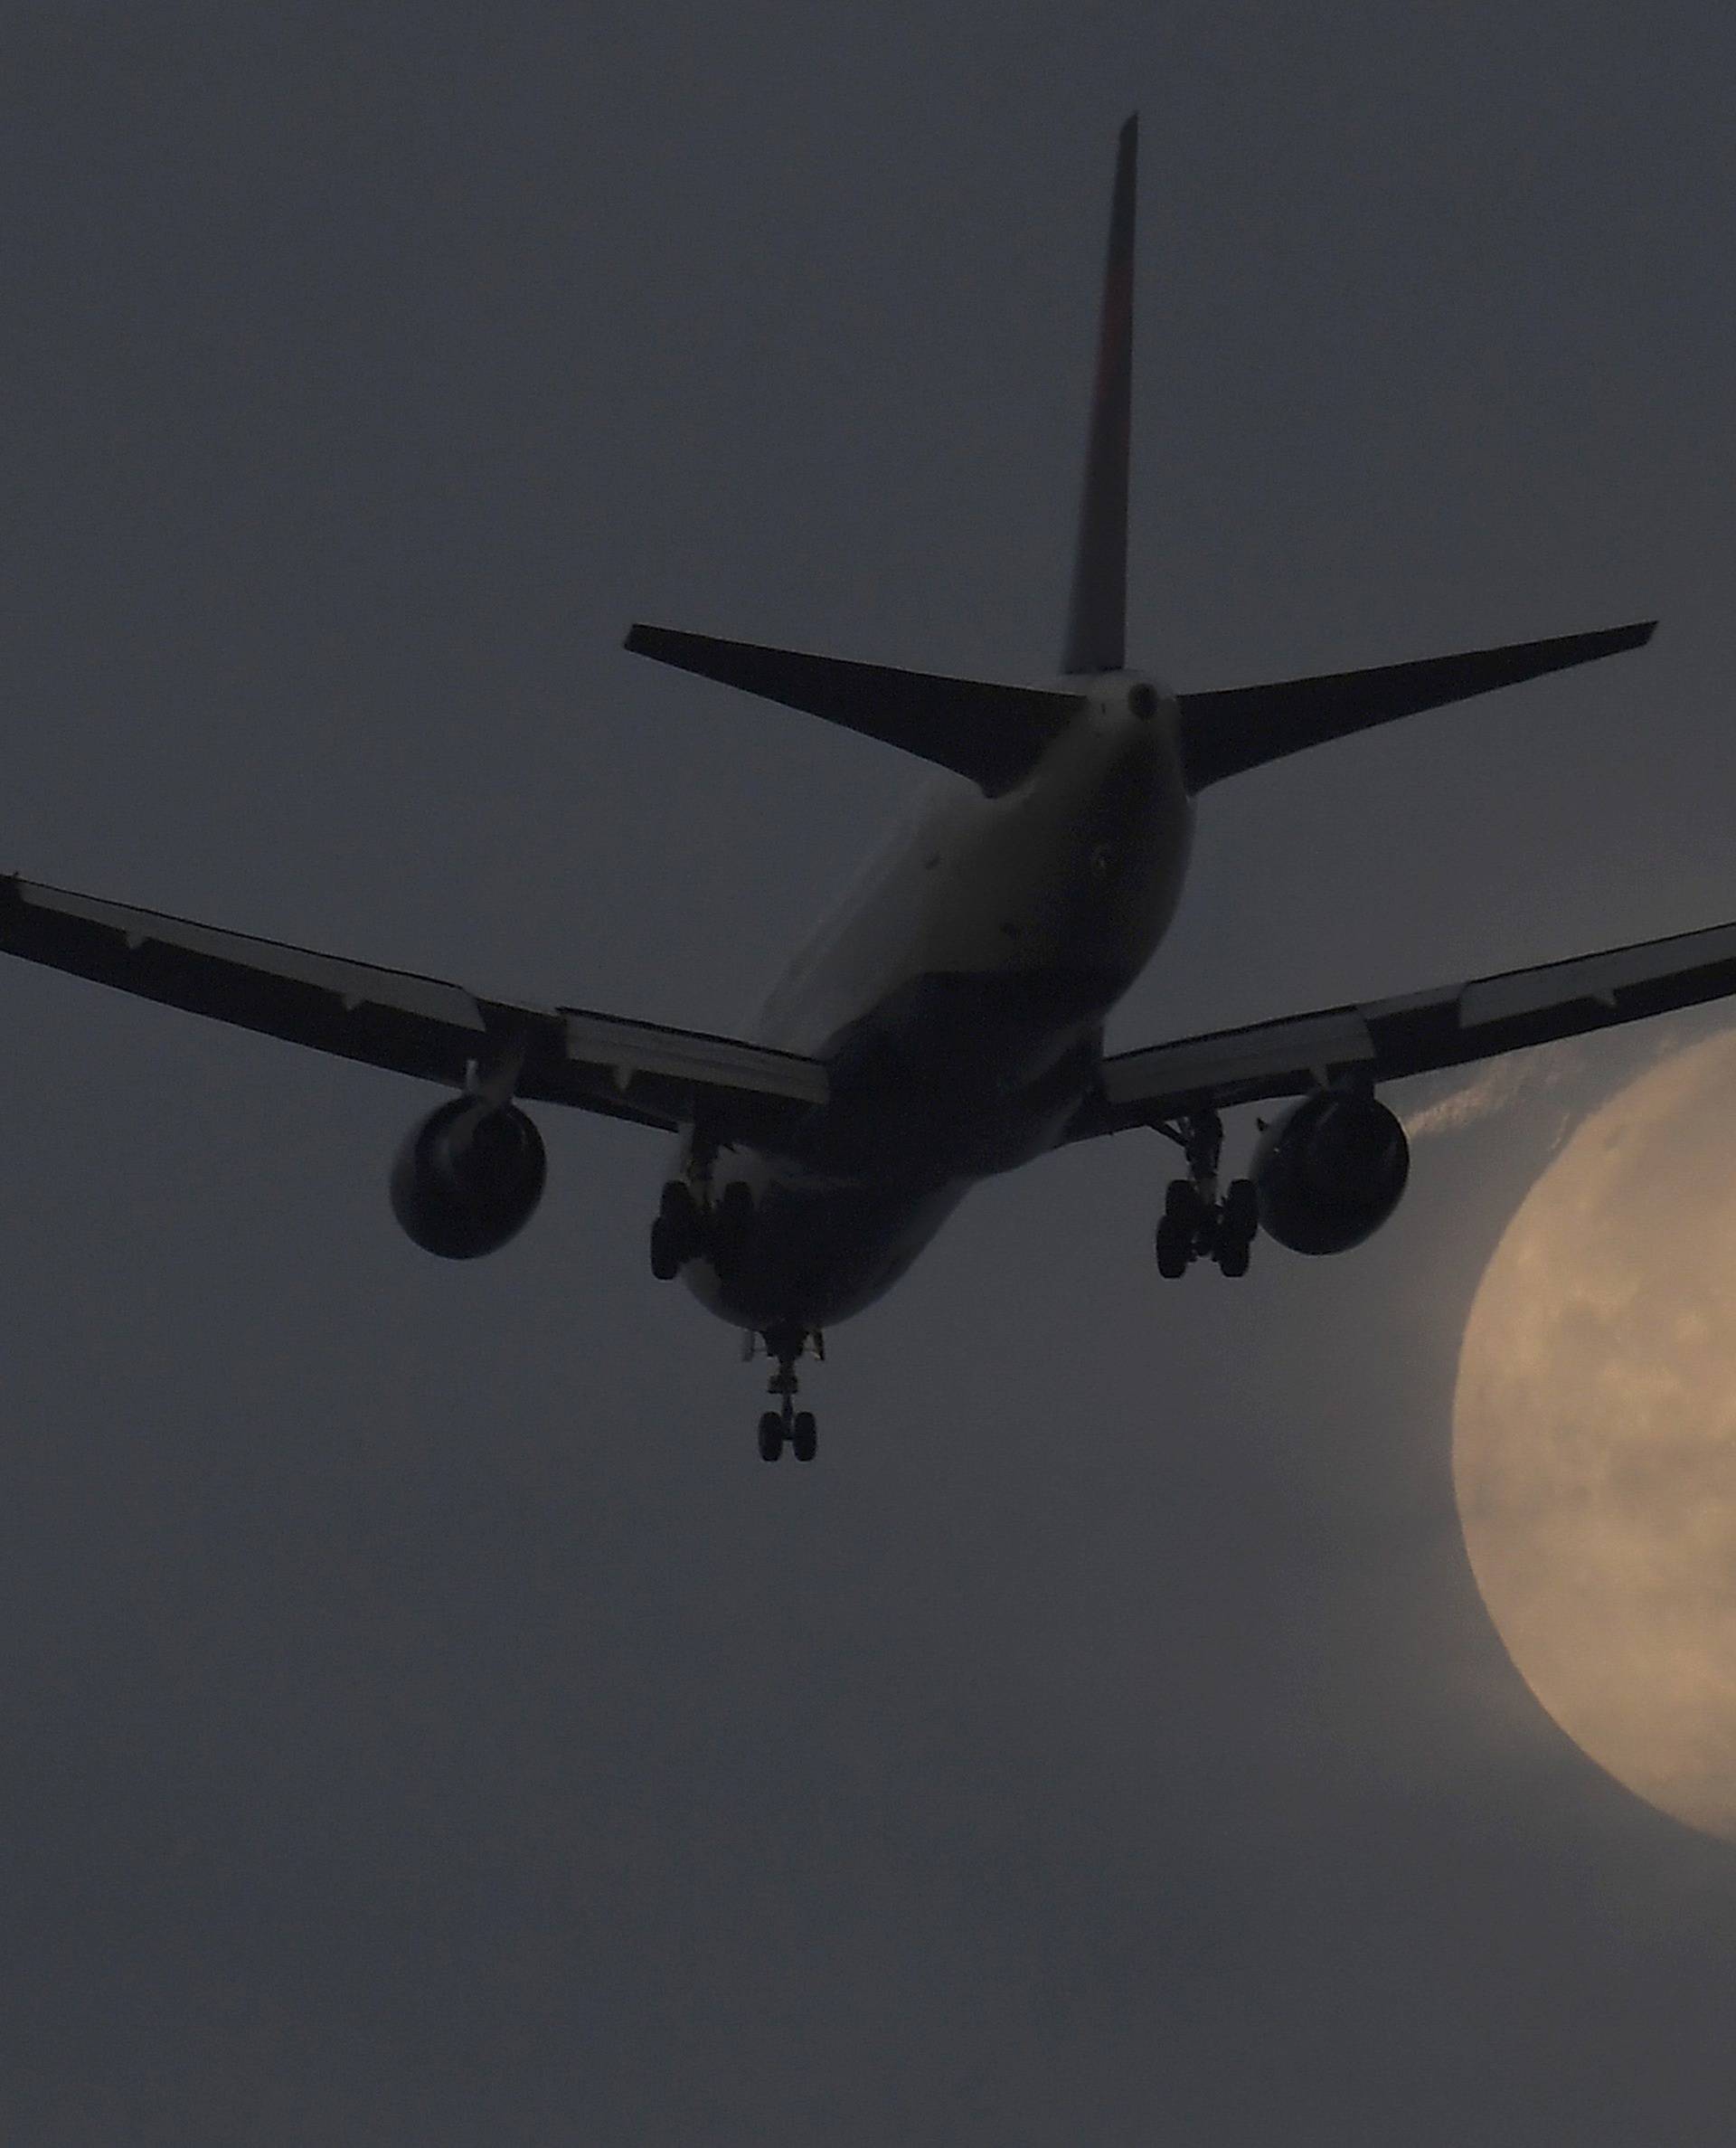 A passenger aircraft makes it's landing approach to Heathrow airport in front of a "super moon" at dawn in west London